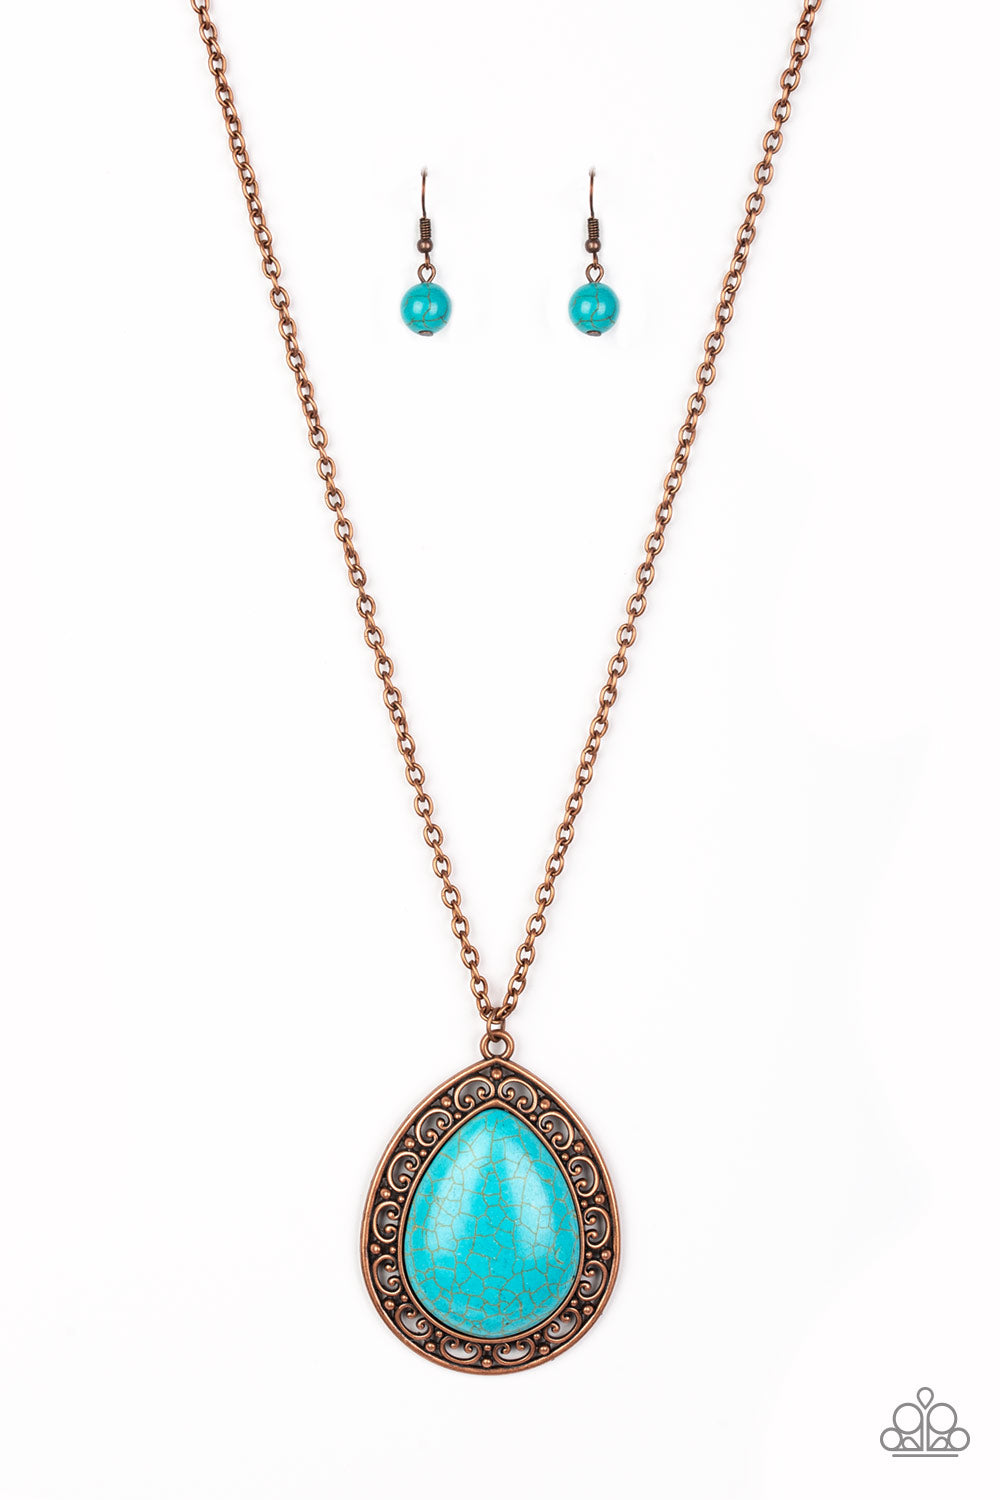 FULL FRONTIER - COPPER TURQUOISE TEARDROP NECKLACE